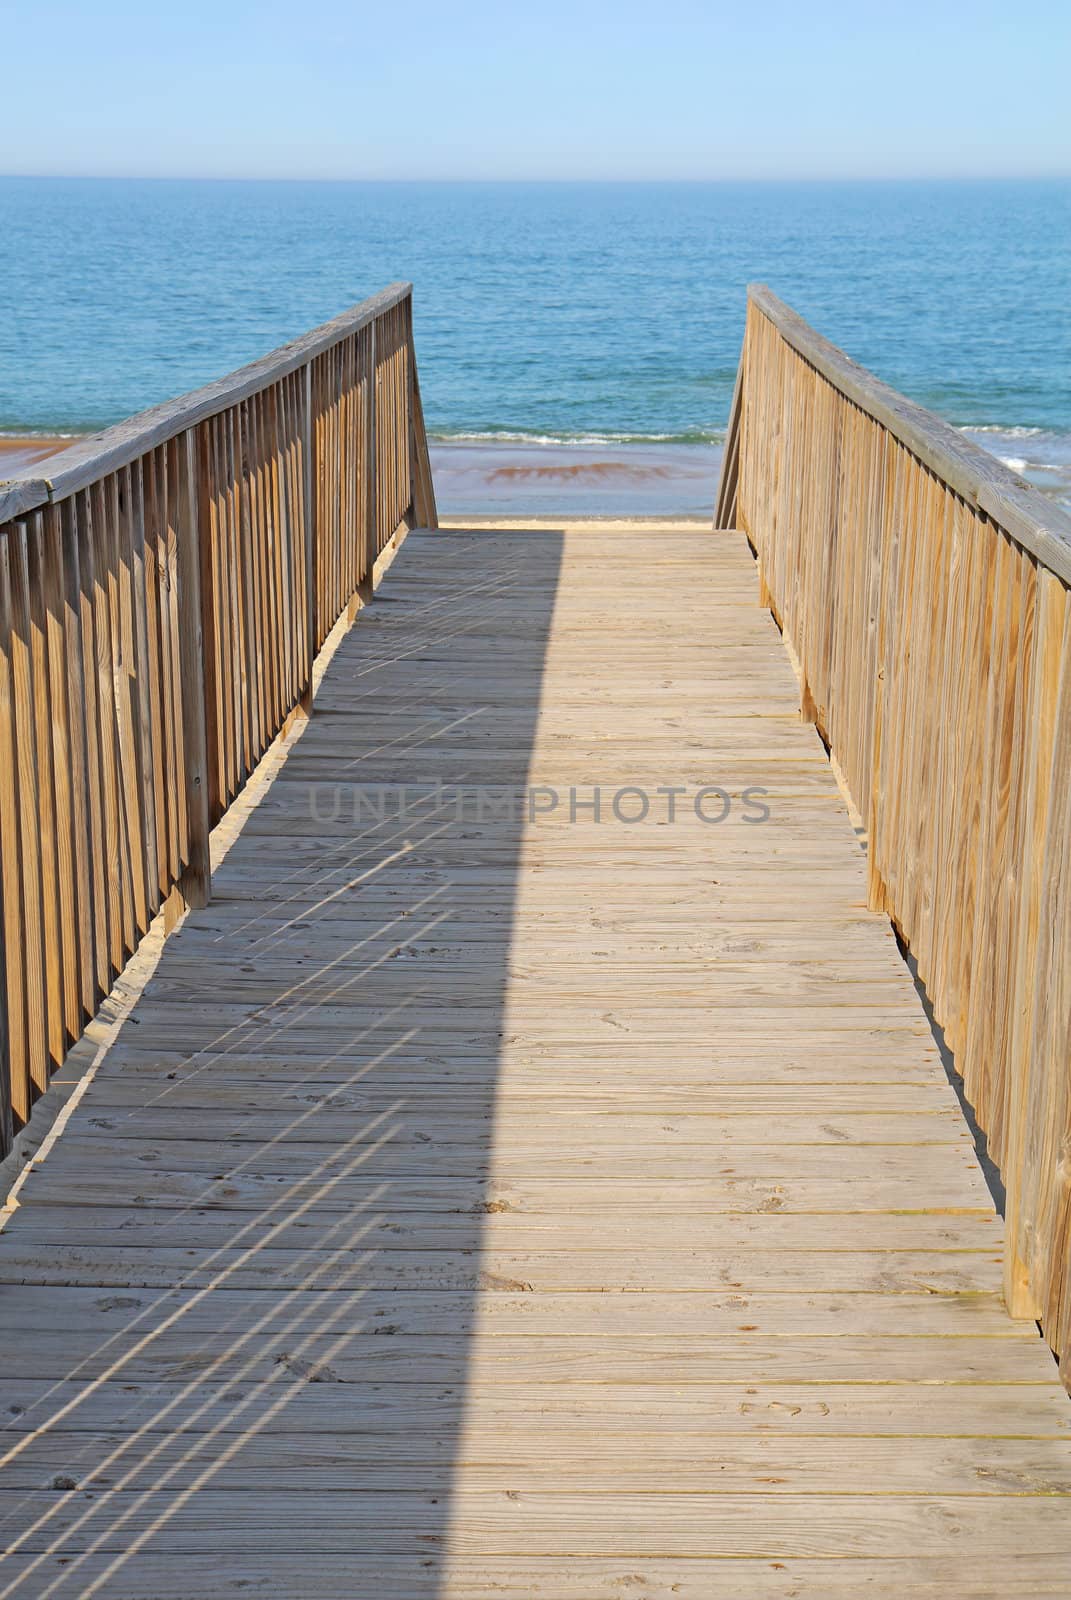 Walkway to a public beach access in Nags Head on the Outer Banks of North Carolina vertical